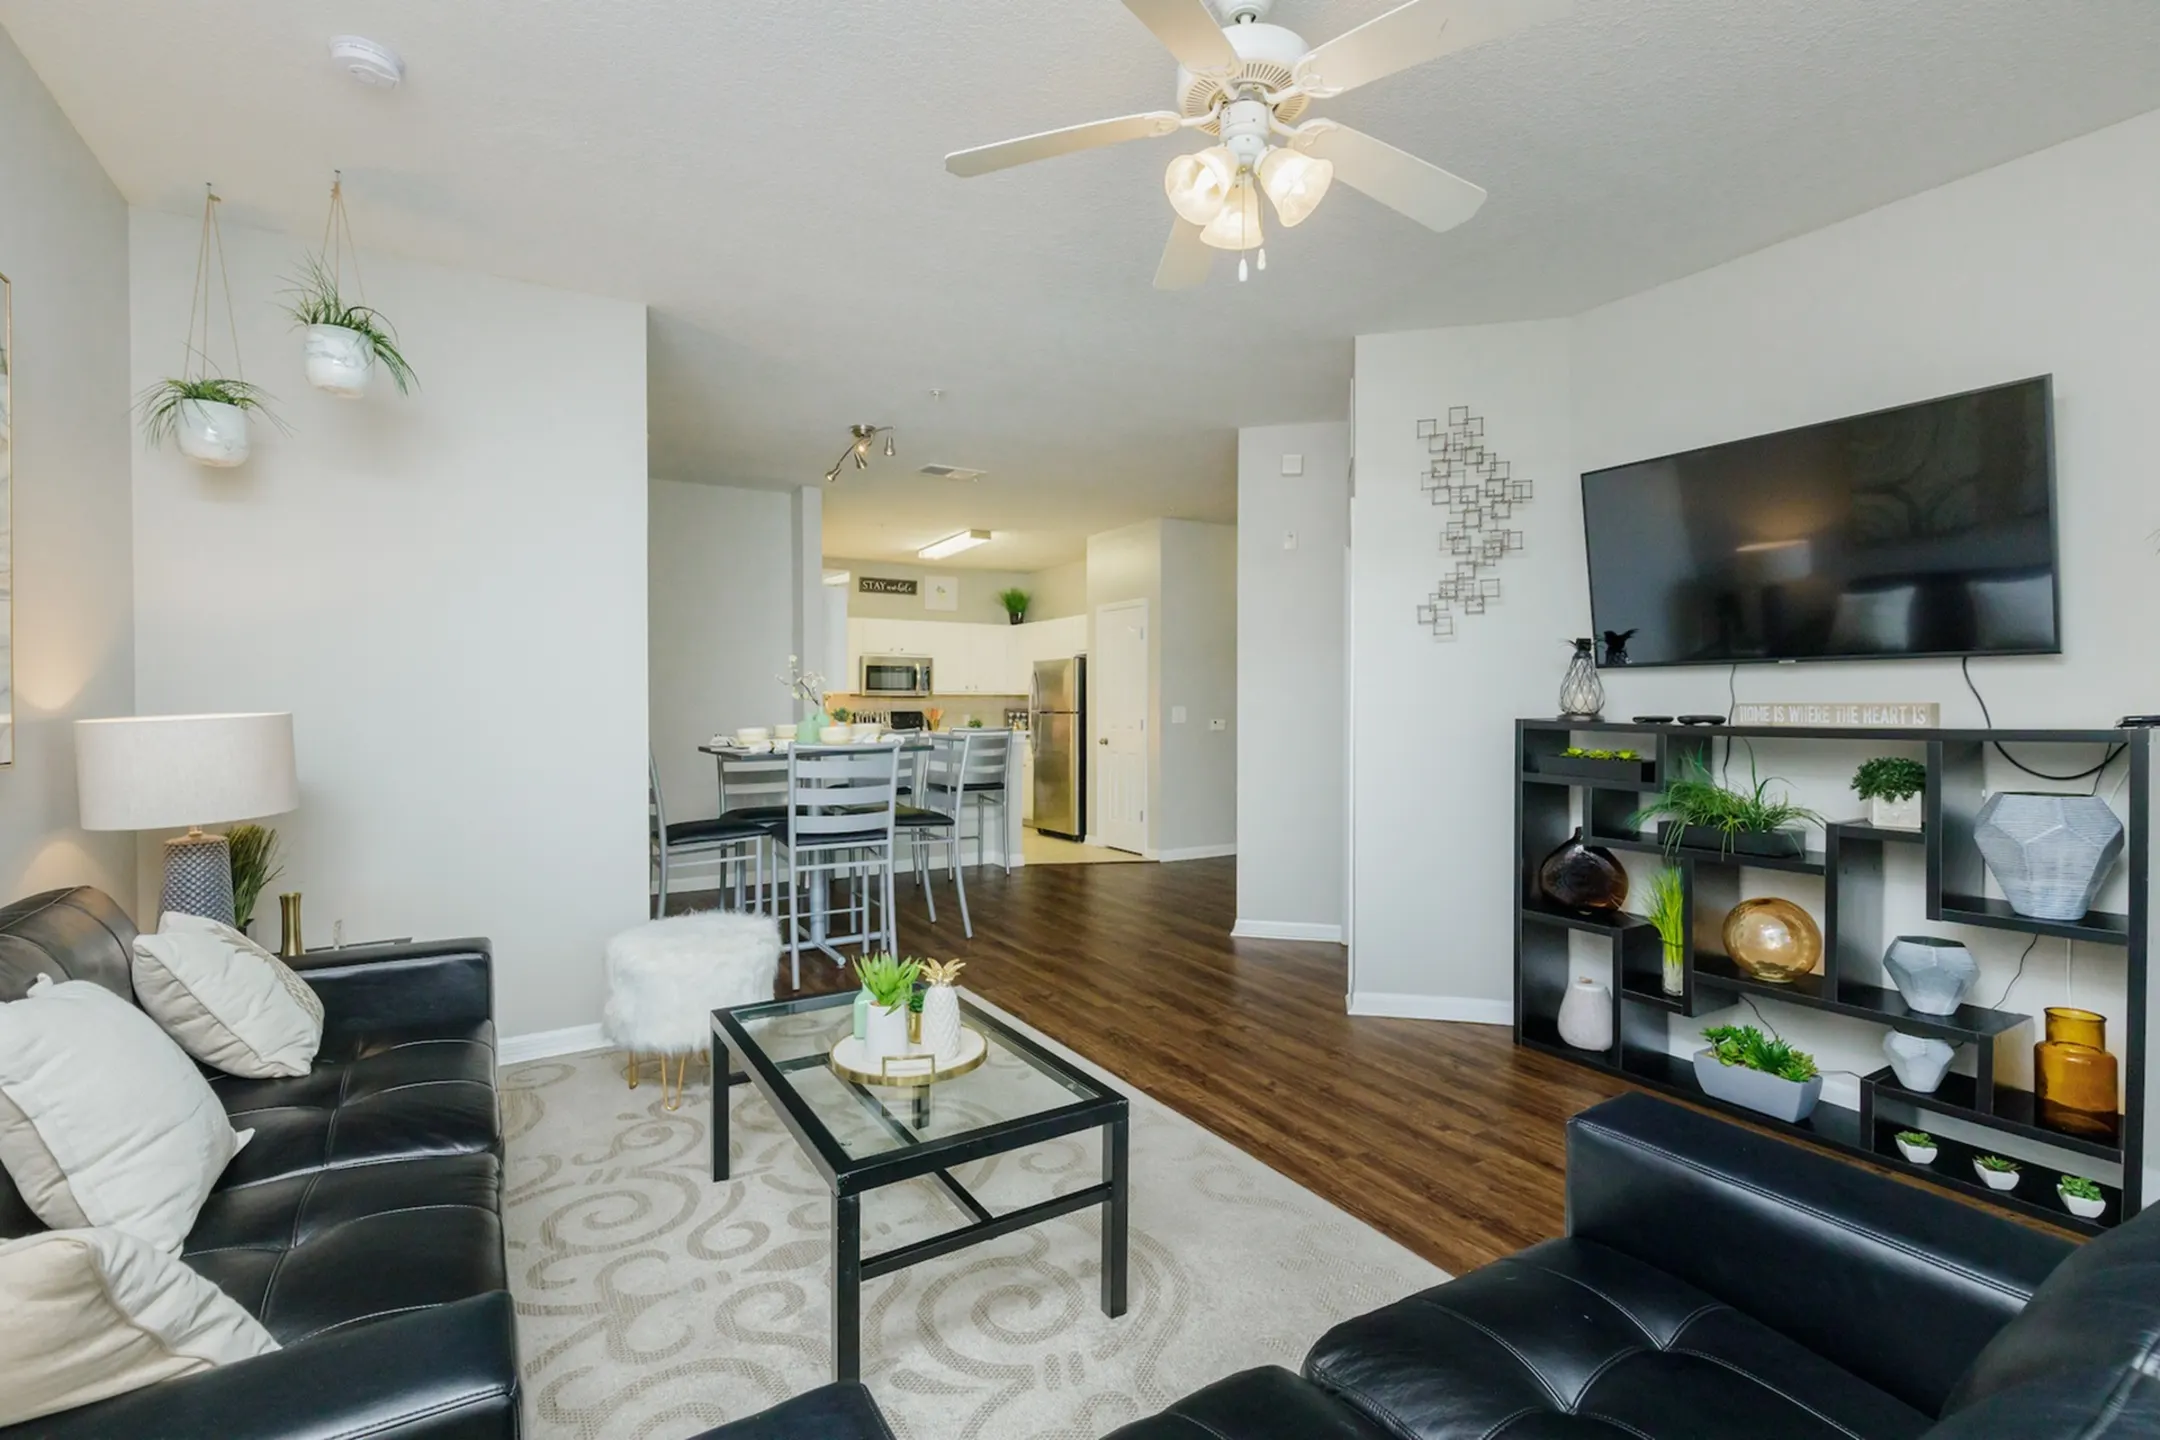 Living Room - West 10 Apartments - Per Bed Lease - Tallahassee, FL